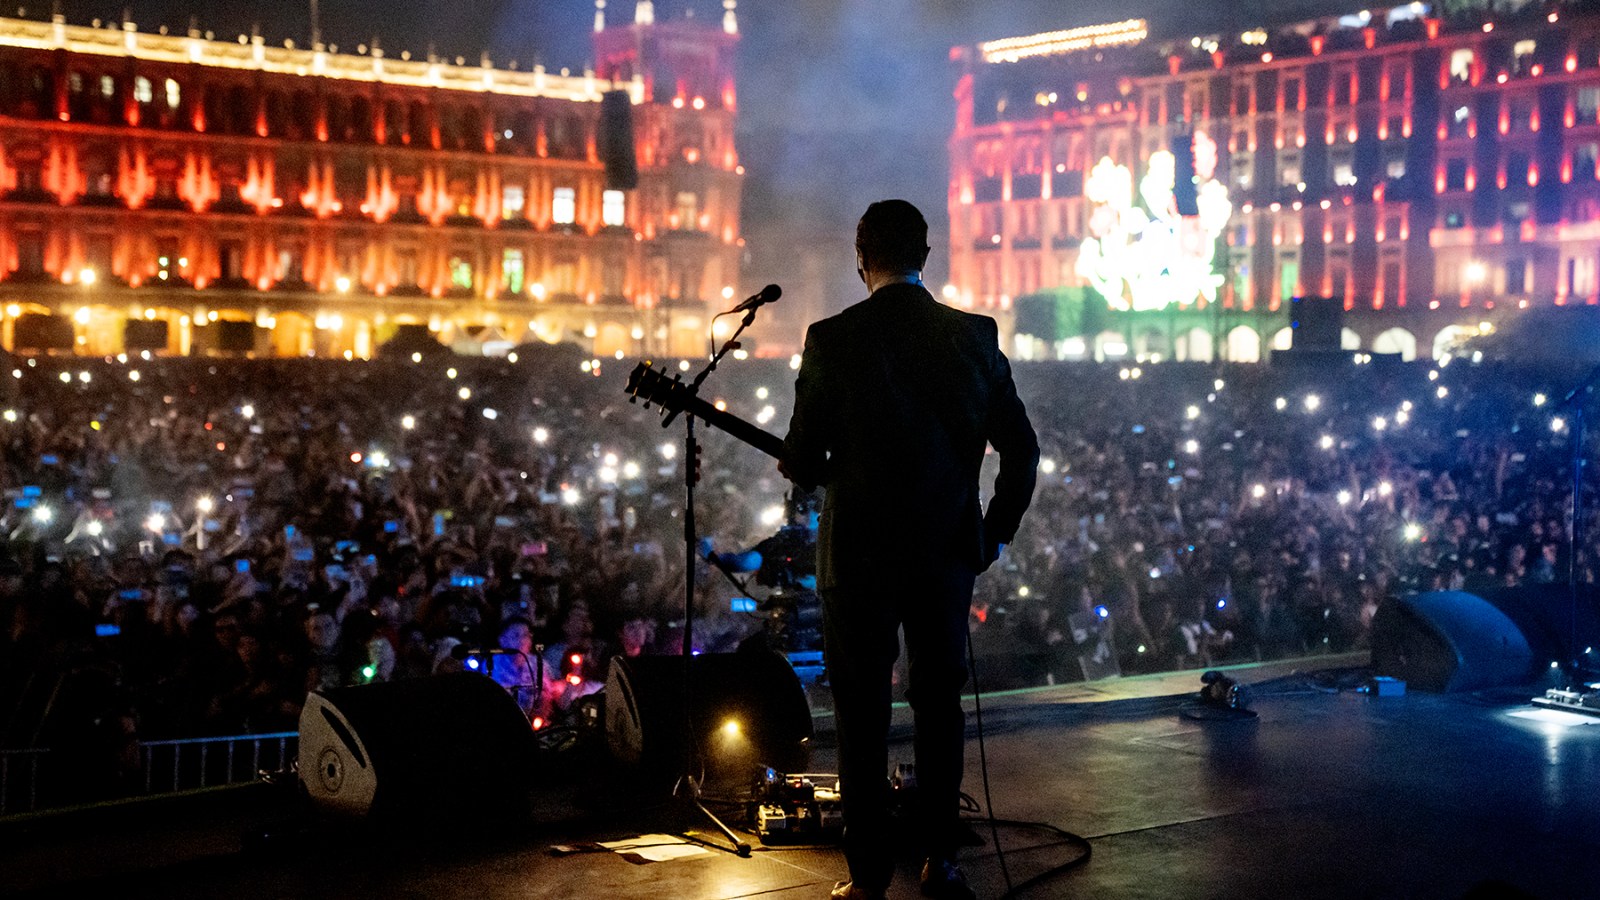 Interpol Play Mexico City: Backstage and in the Crowd at Their Biggest Show Ever